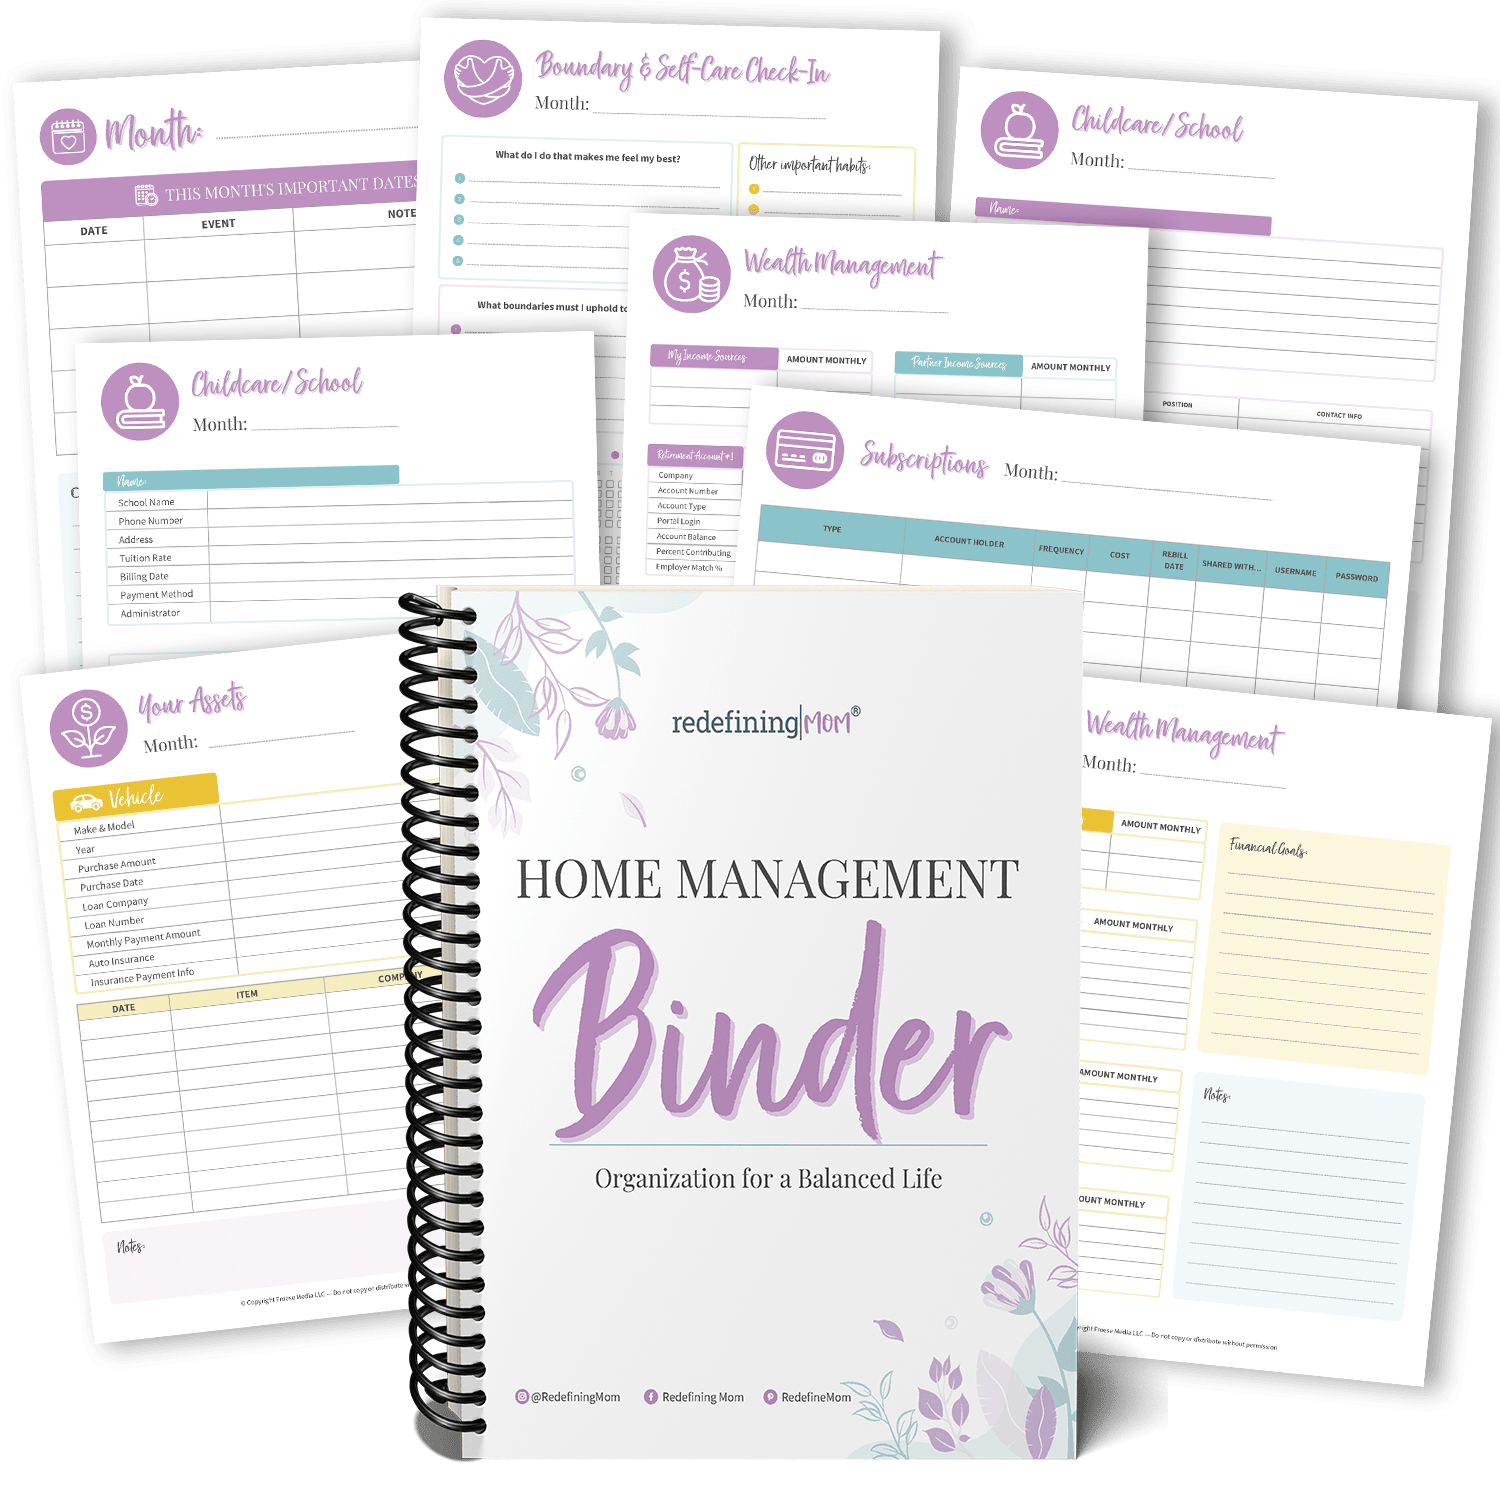 The best home management binder for getting your life in order and organizing your home! Pages include calendar pages, boundary check-in, children/school management, wealth management and much more!